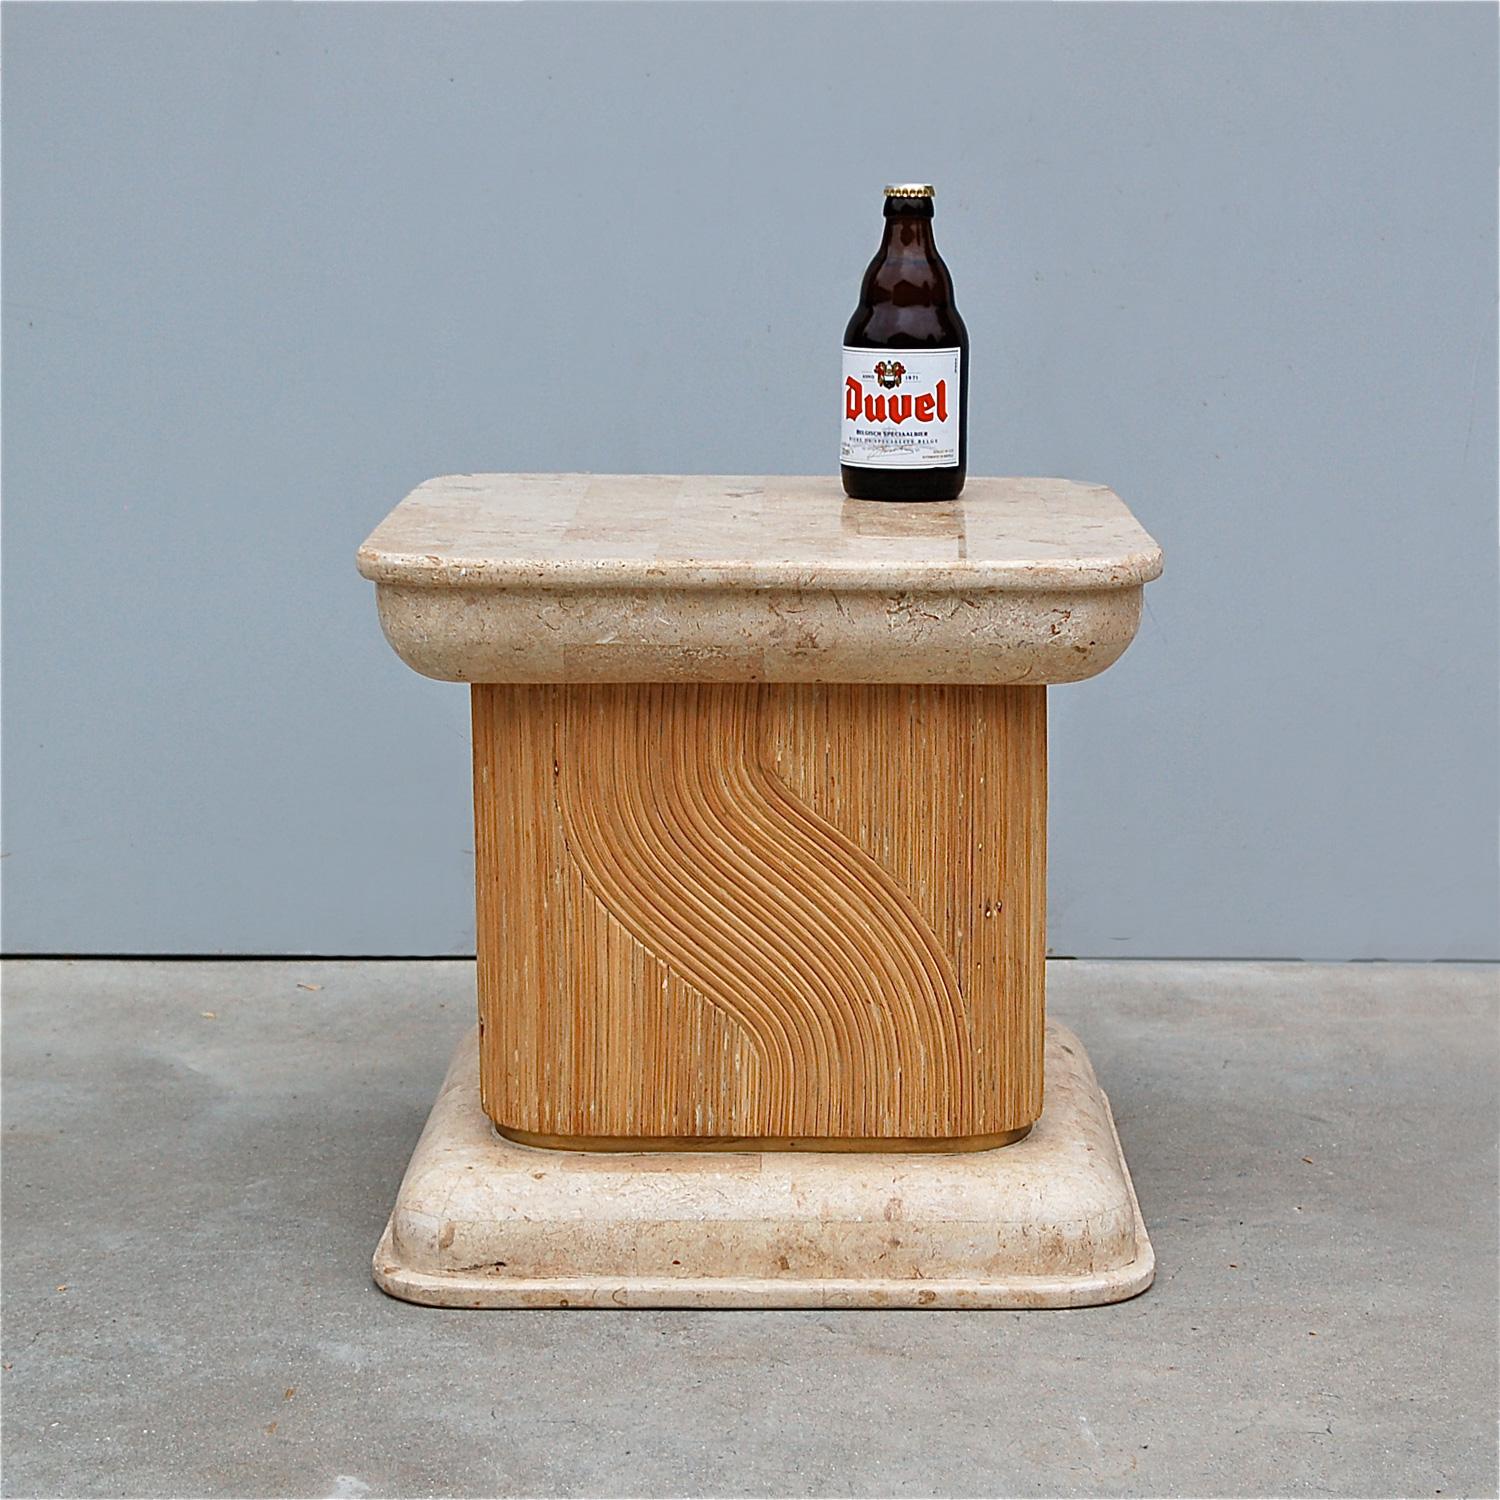 Late 20th century, Italian square travertine side table. Each side is decorated with bamboo in a straight and wavy stripe pattern with a brass trim at the base.